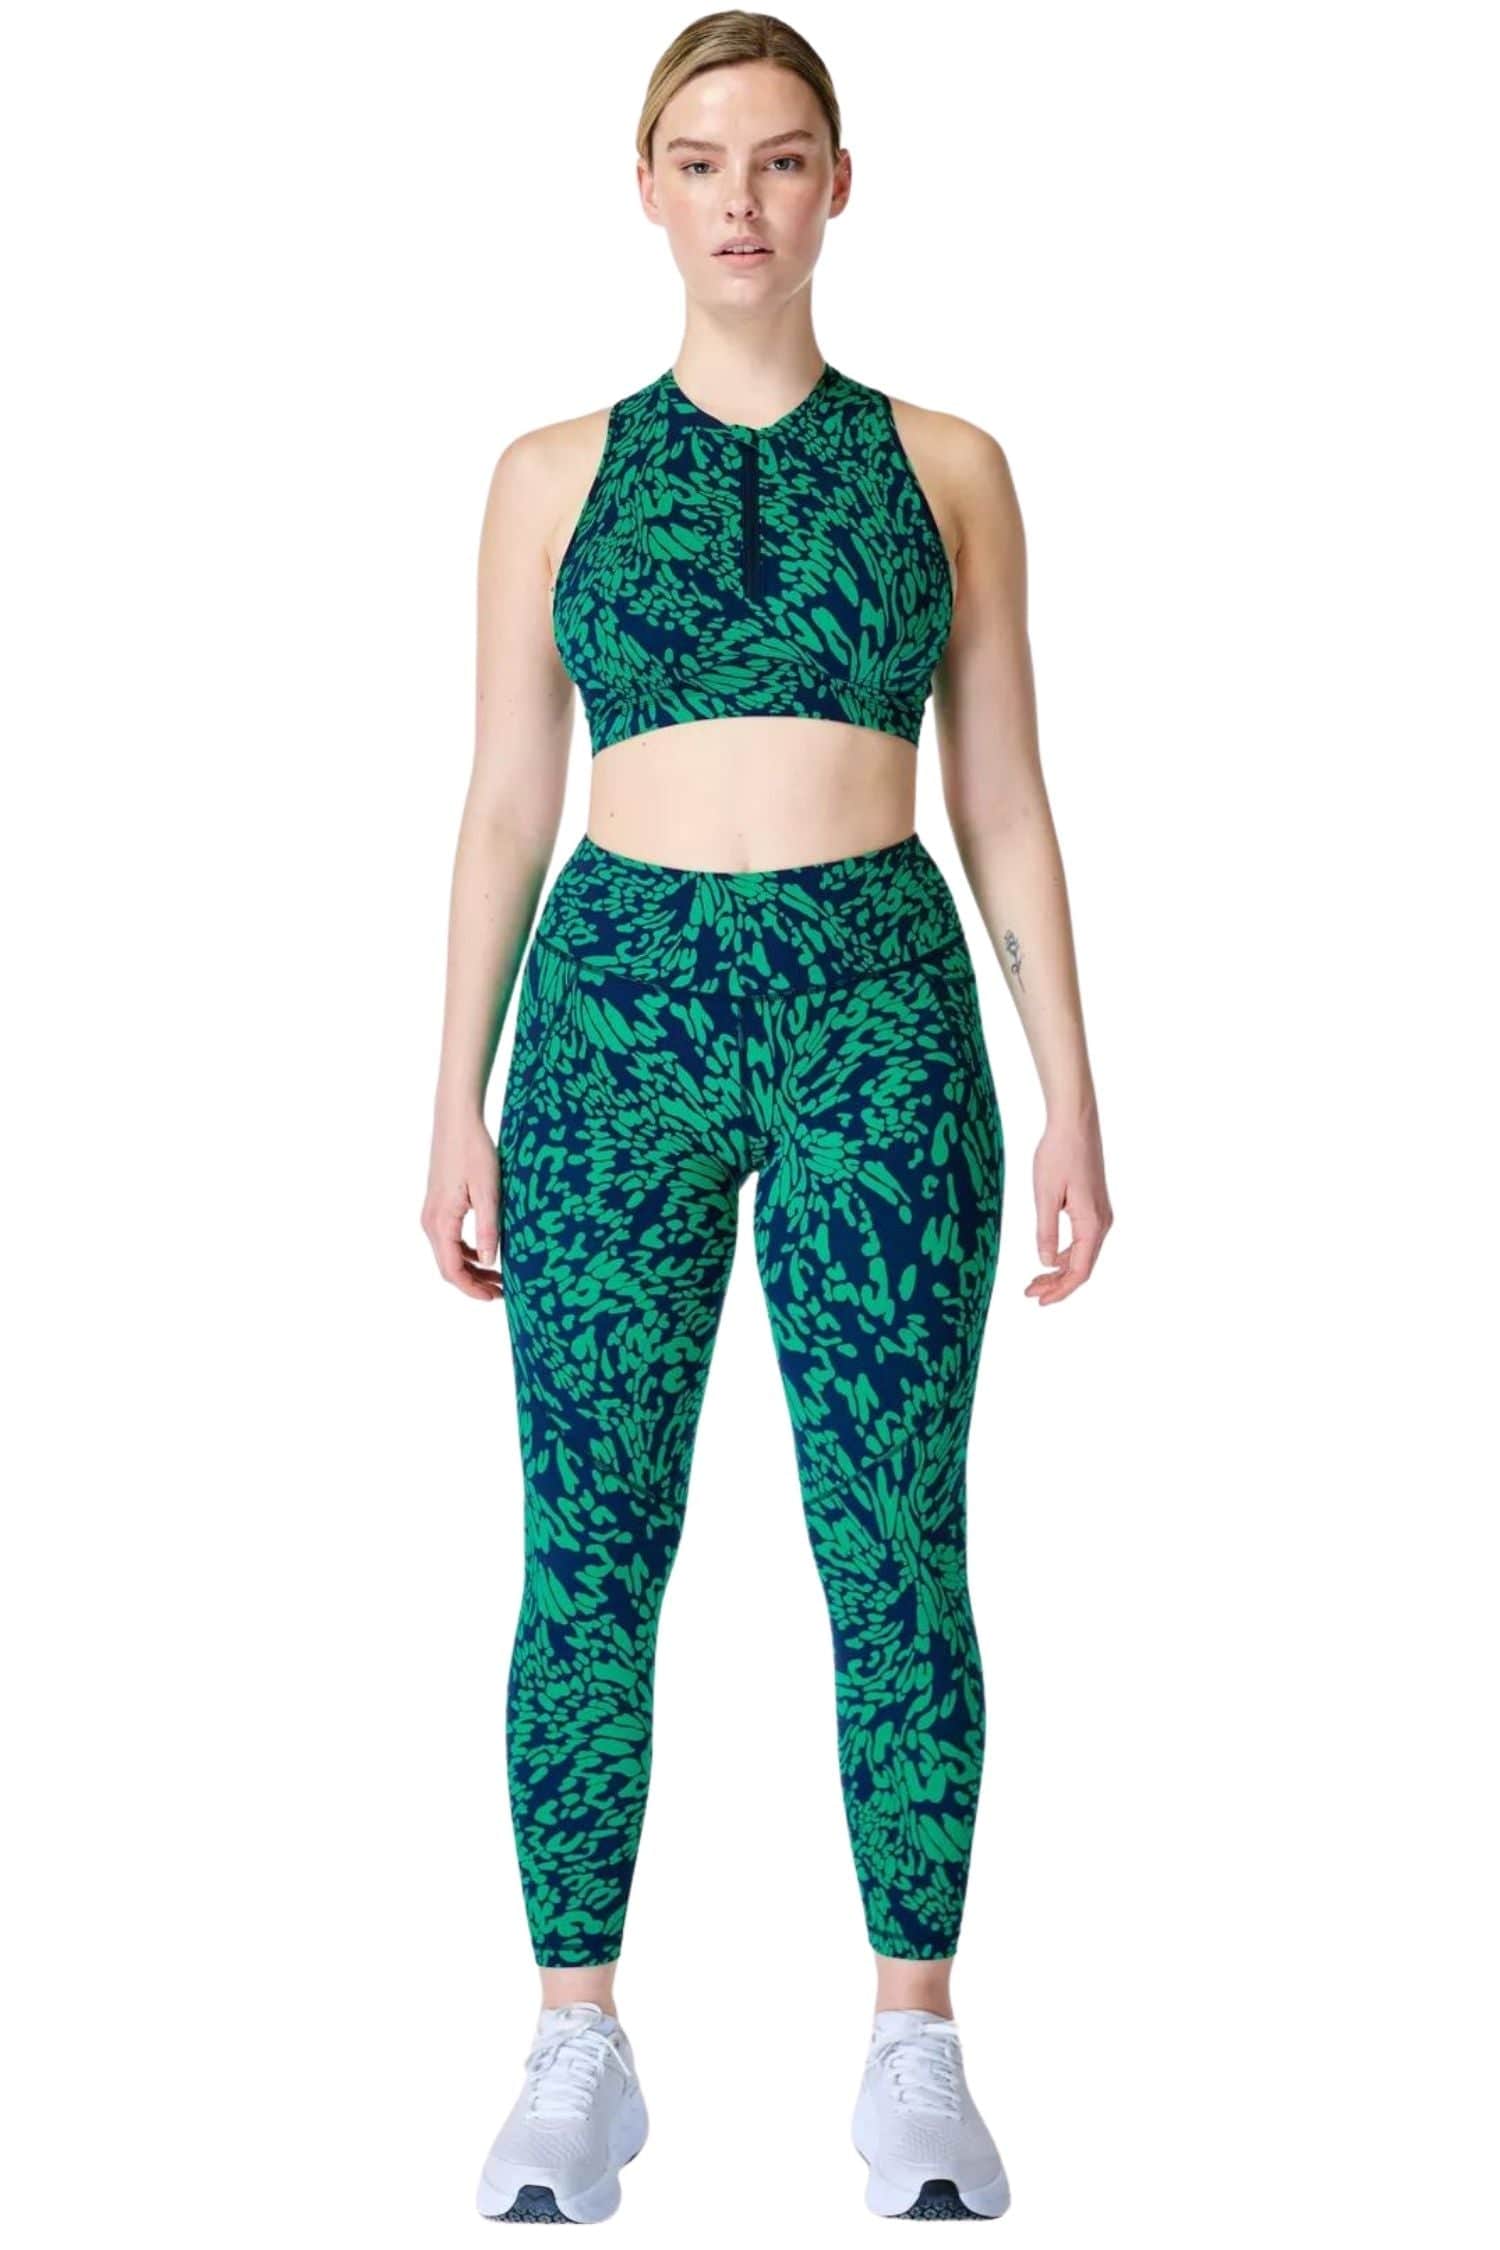 Bottoms Up with Bum Sculpting leggings by SWEATY BETTY